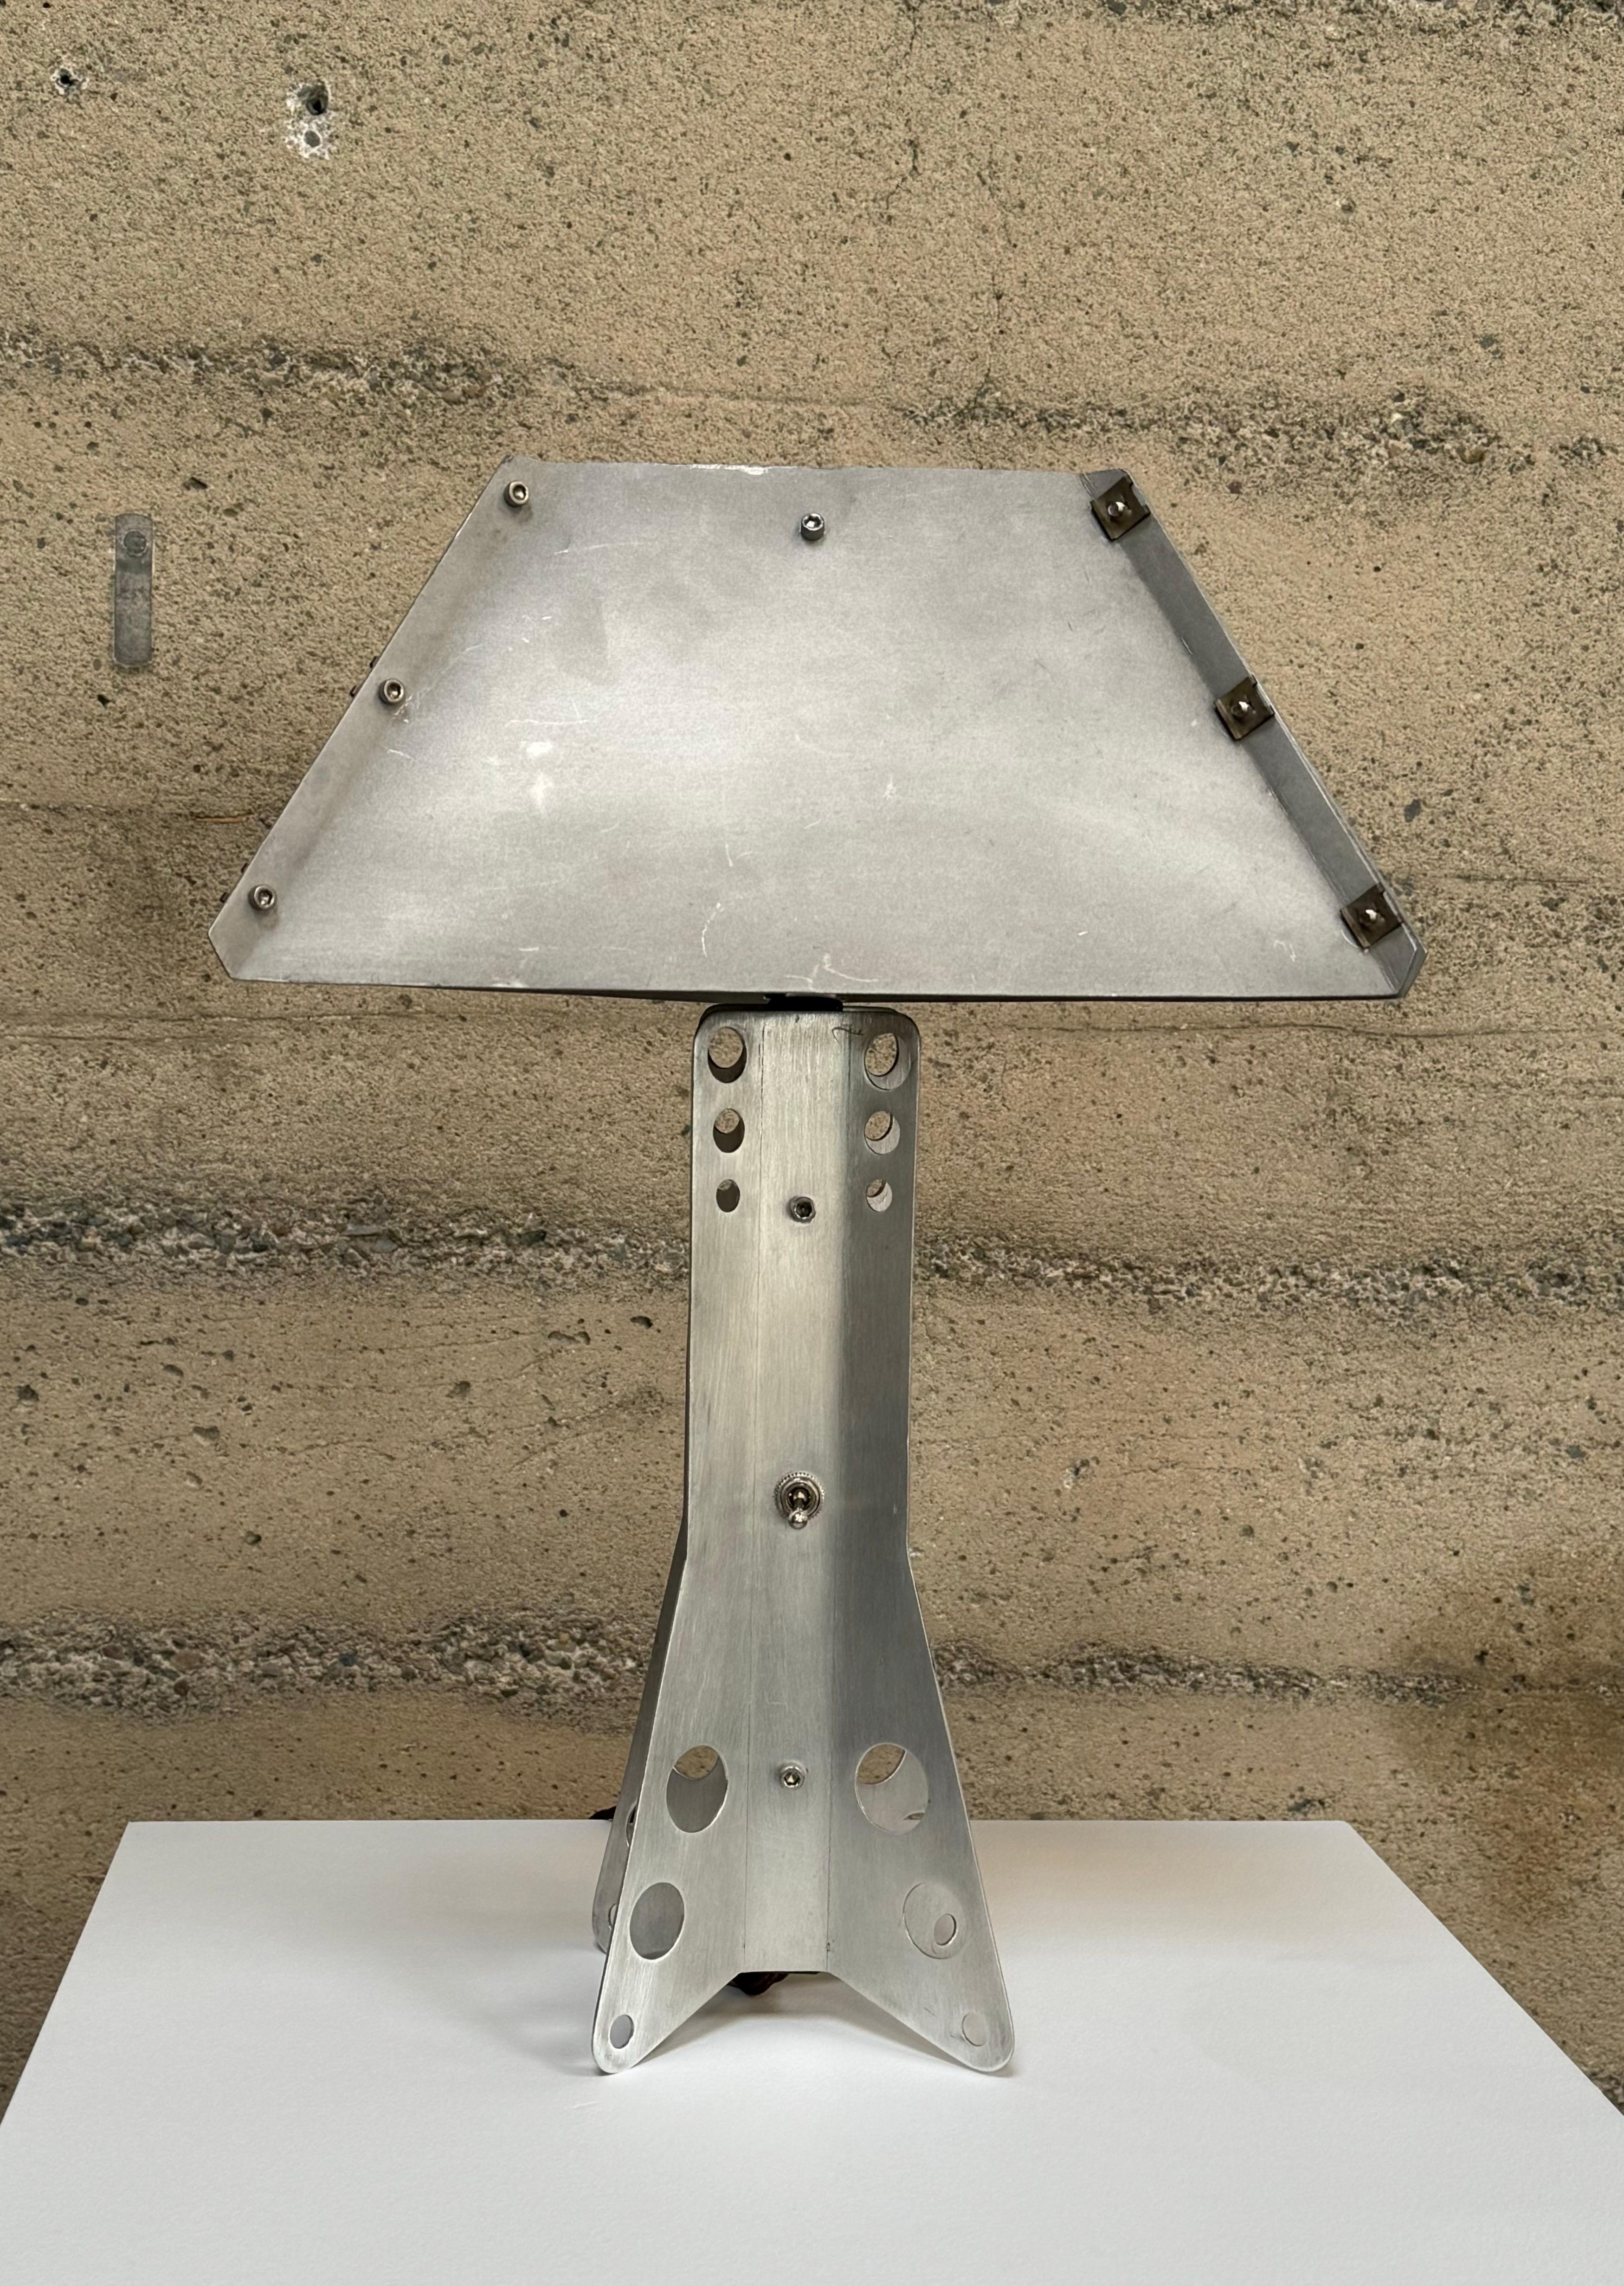 Hand-Crafted Handmade Modernist / Machine Age Aluminum Table Lamp For Sale